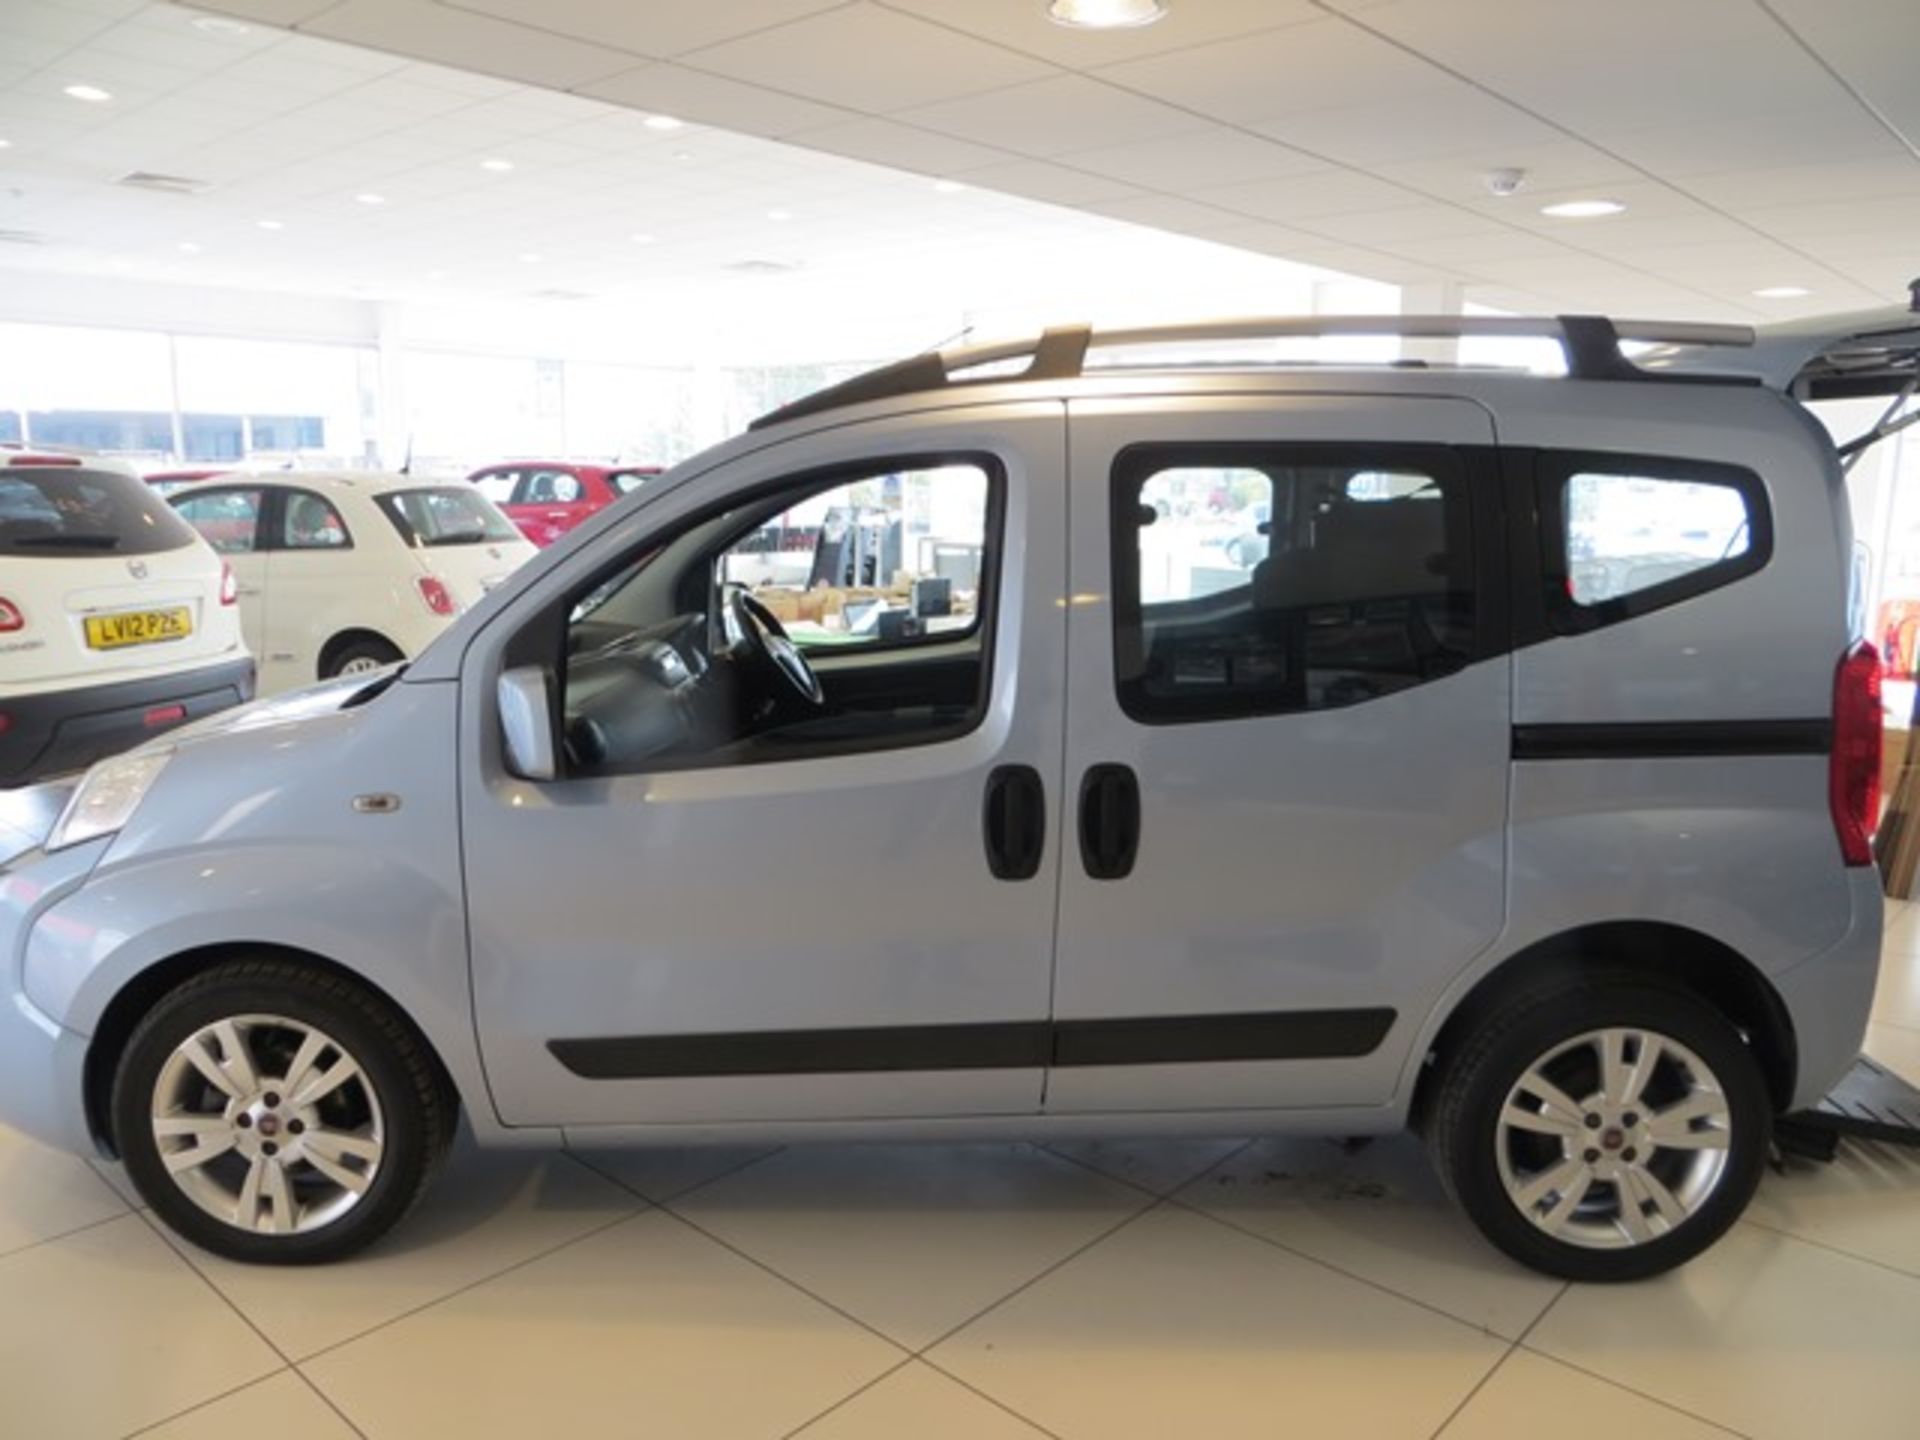 Fiat Qubo with Sirus drive / passenger from wheel chair conversion Dynamic Multijet diesel auto - Image 3 of 11